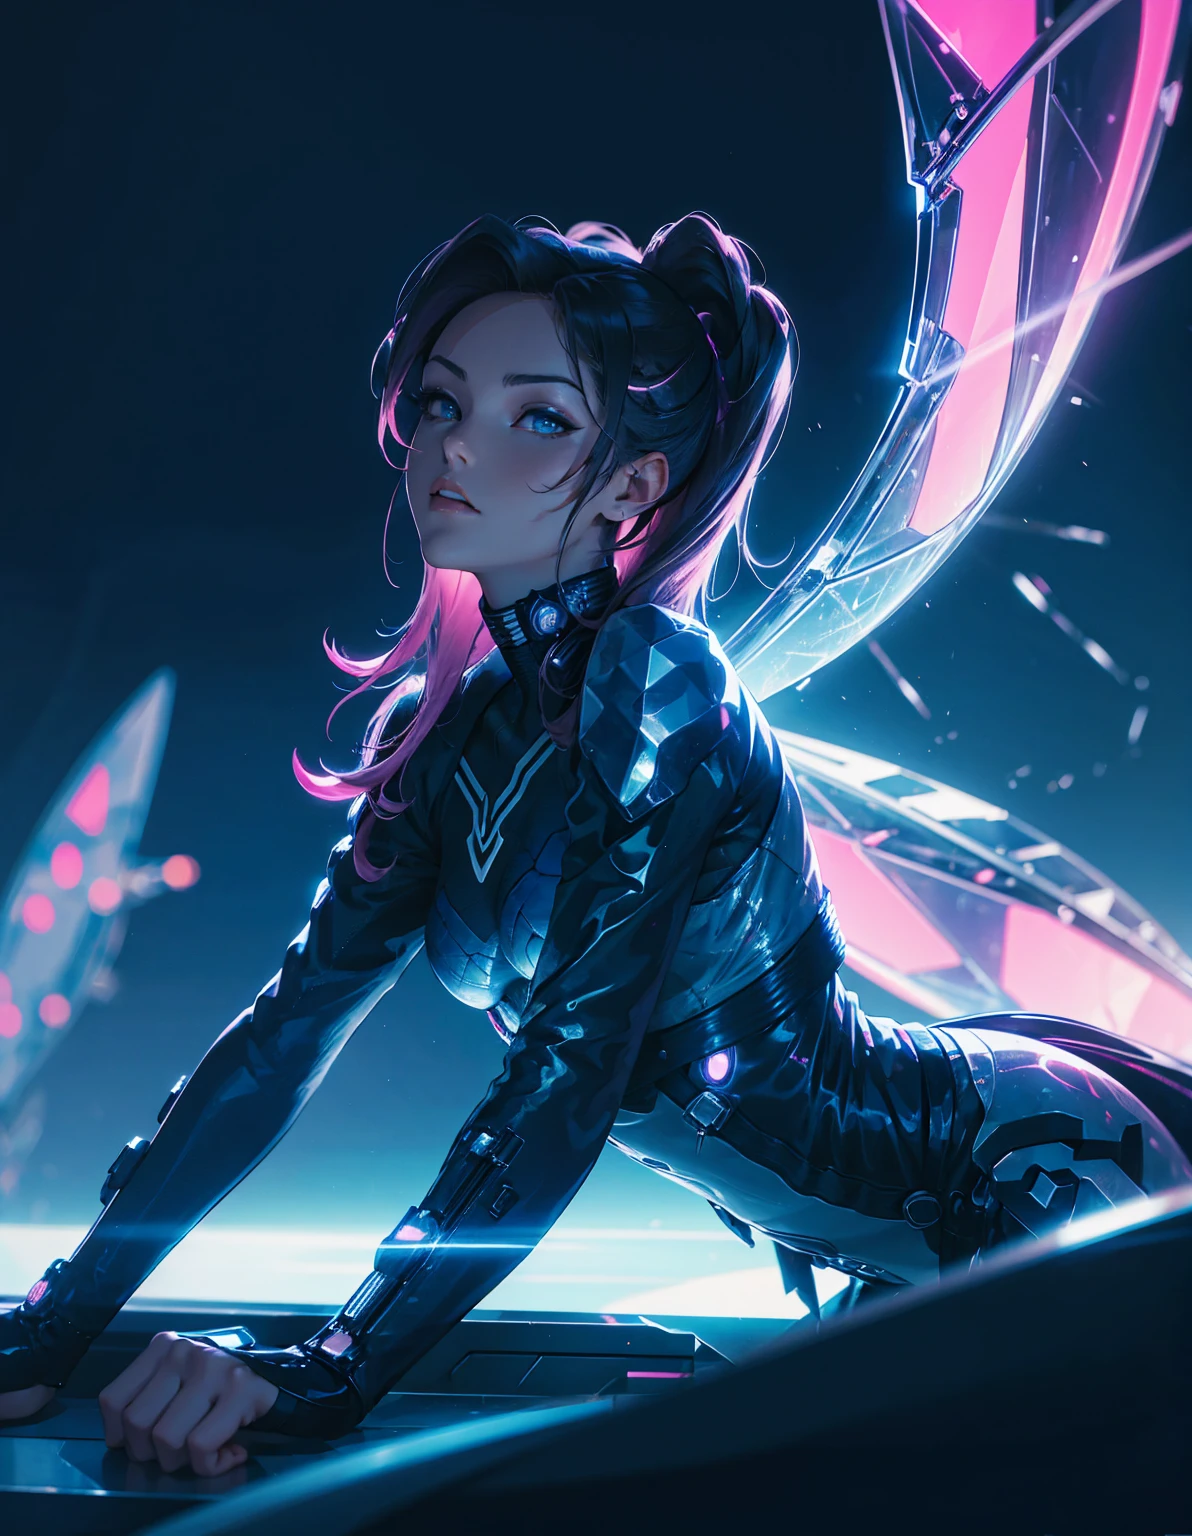 A cyberpunk girl with a futuristic look, featuring mechanical wings and horns, sitting in a dynamic pose. She has dark hair with neon highlights and is wearing a black outfit with a blue jacket. The background is a simple vibrant, neon-lit cityscape with blue and pink hues, emphasizing the high-tech, sci-fi atmosphere. --ar 3:4 --stylize 1000 --niji 6
